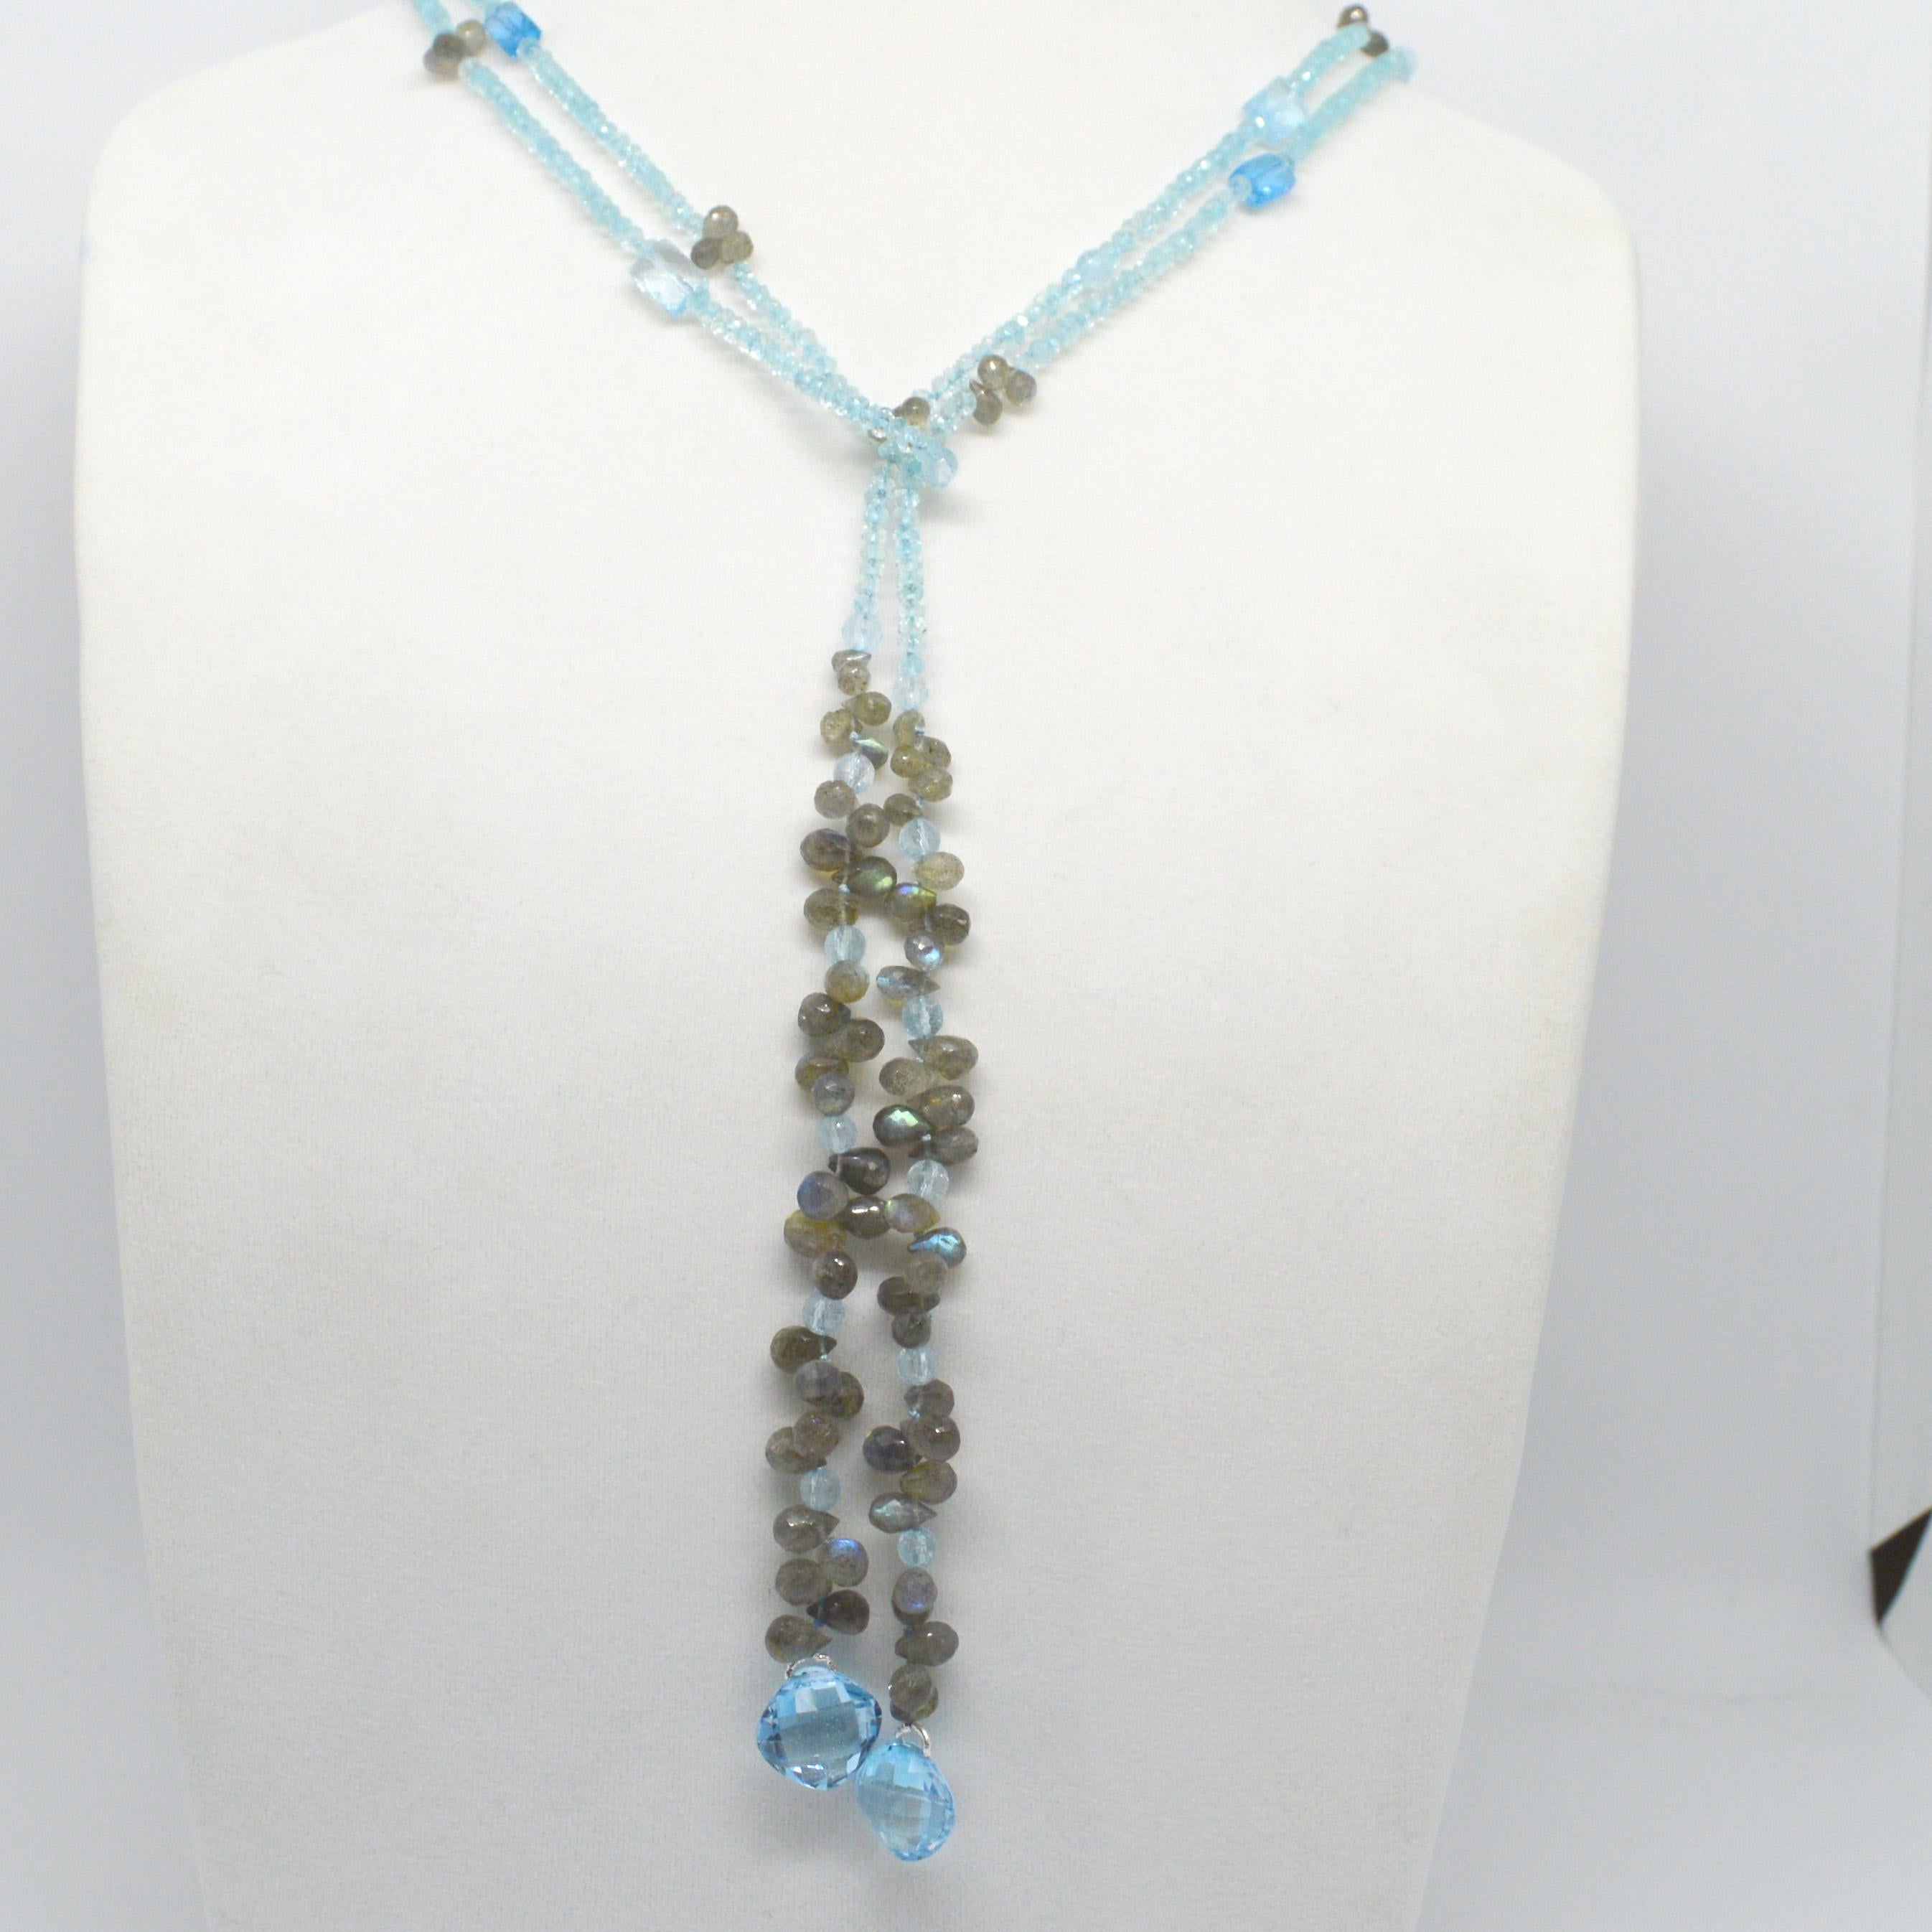 Versatile scarf style lariat necklace with 3x2mm Faceted Blue Topaz beads, 10x4mm Faceted Labradorite Teardrop beads,  14mm Faceted double sided checker board cut Blue Topaz beads. Hand knotted for strength and durability.

Total length 1.5m 60